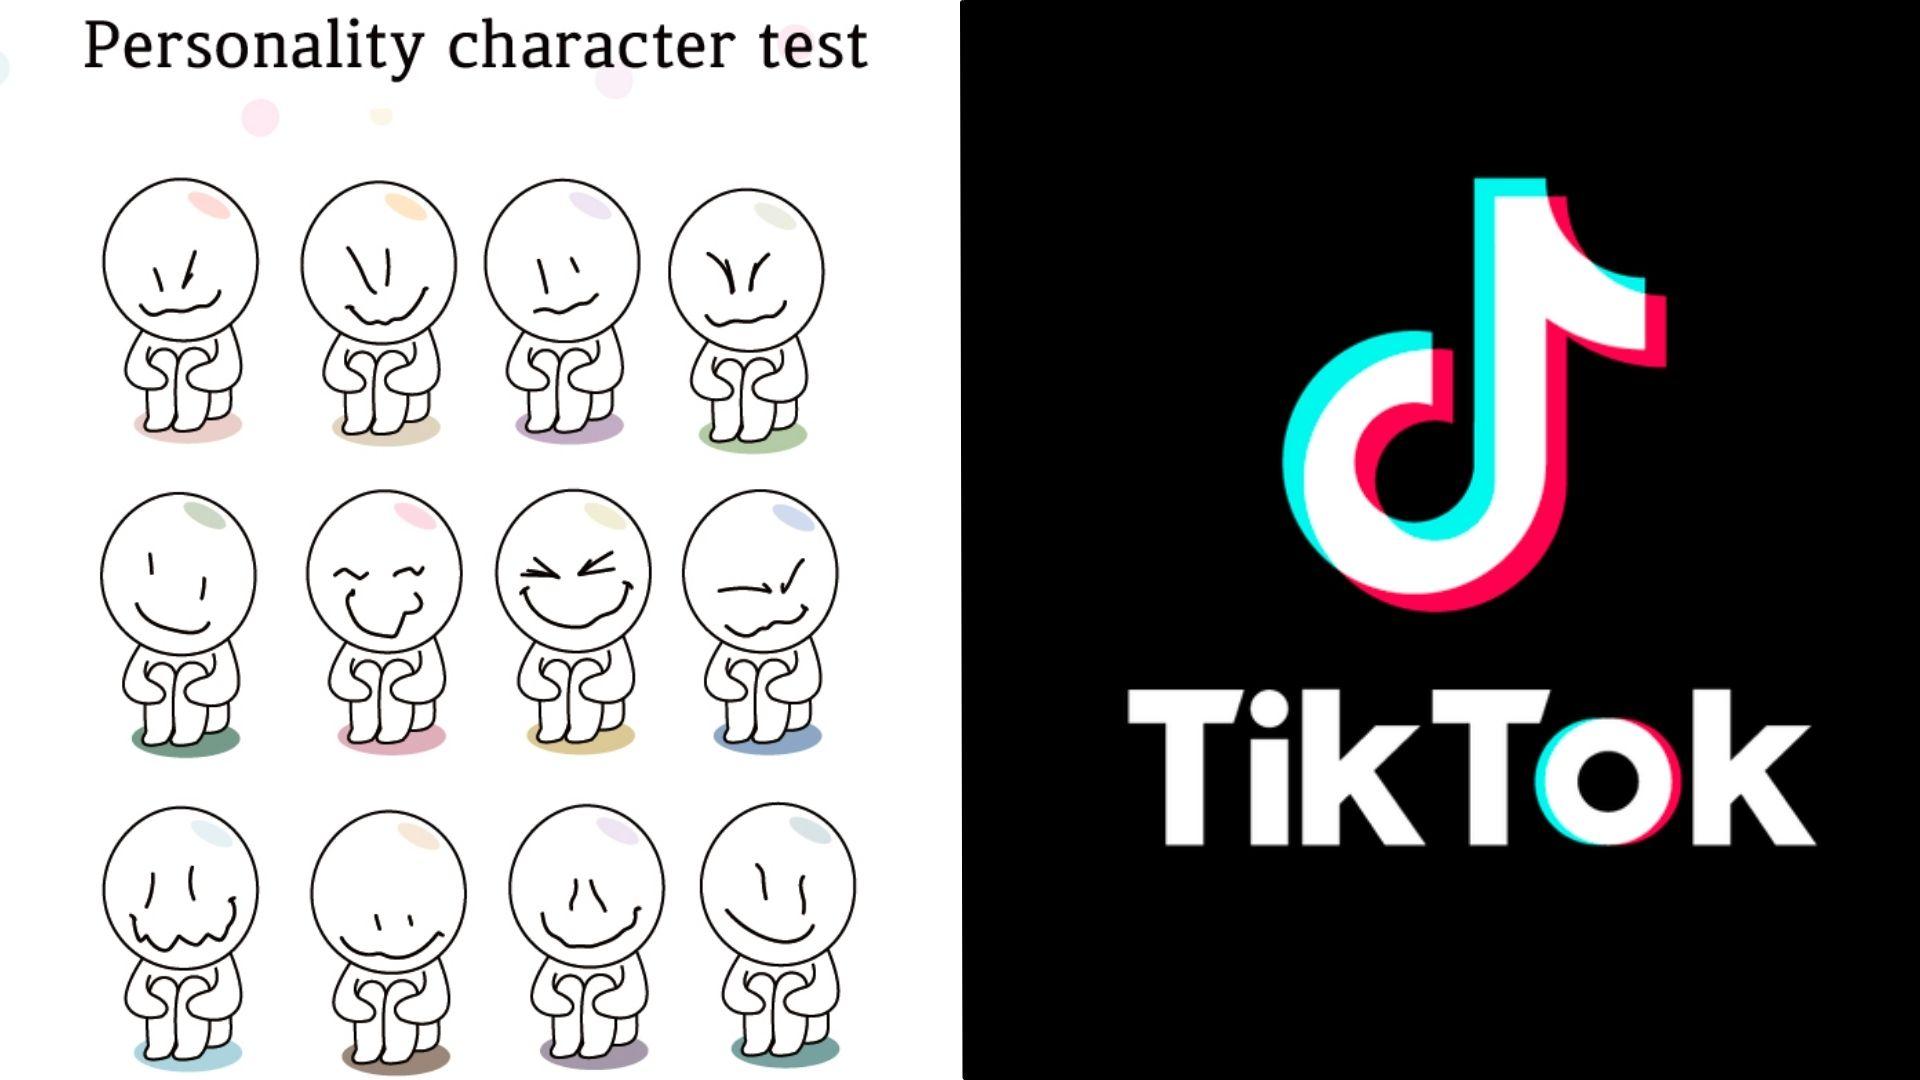 TikTok logo side-by-side with white characters and persoanlity test wording